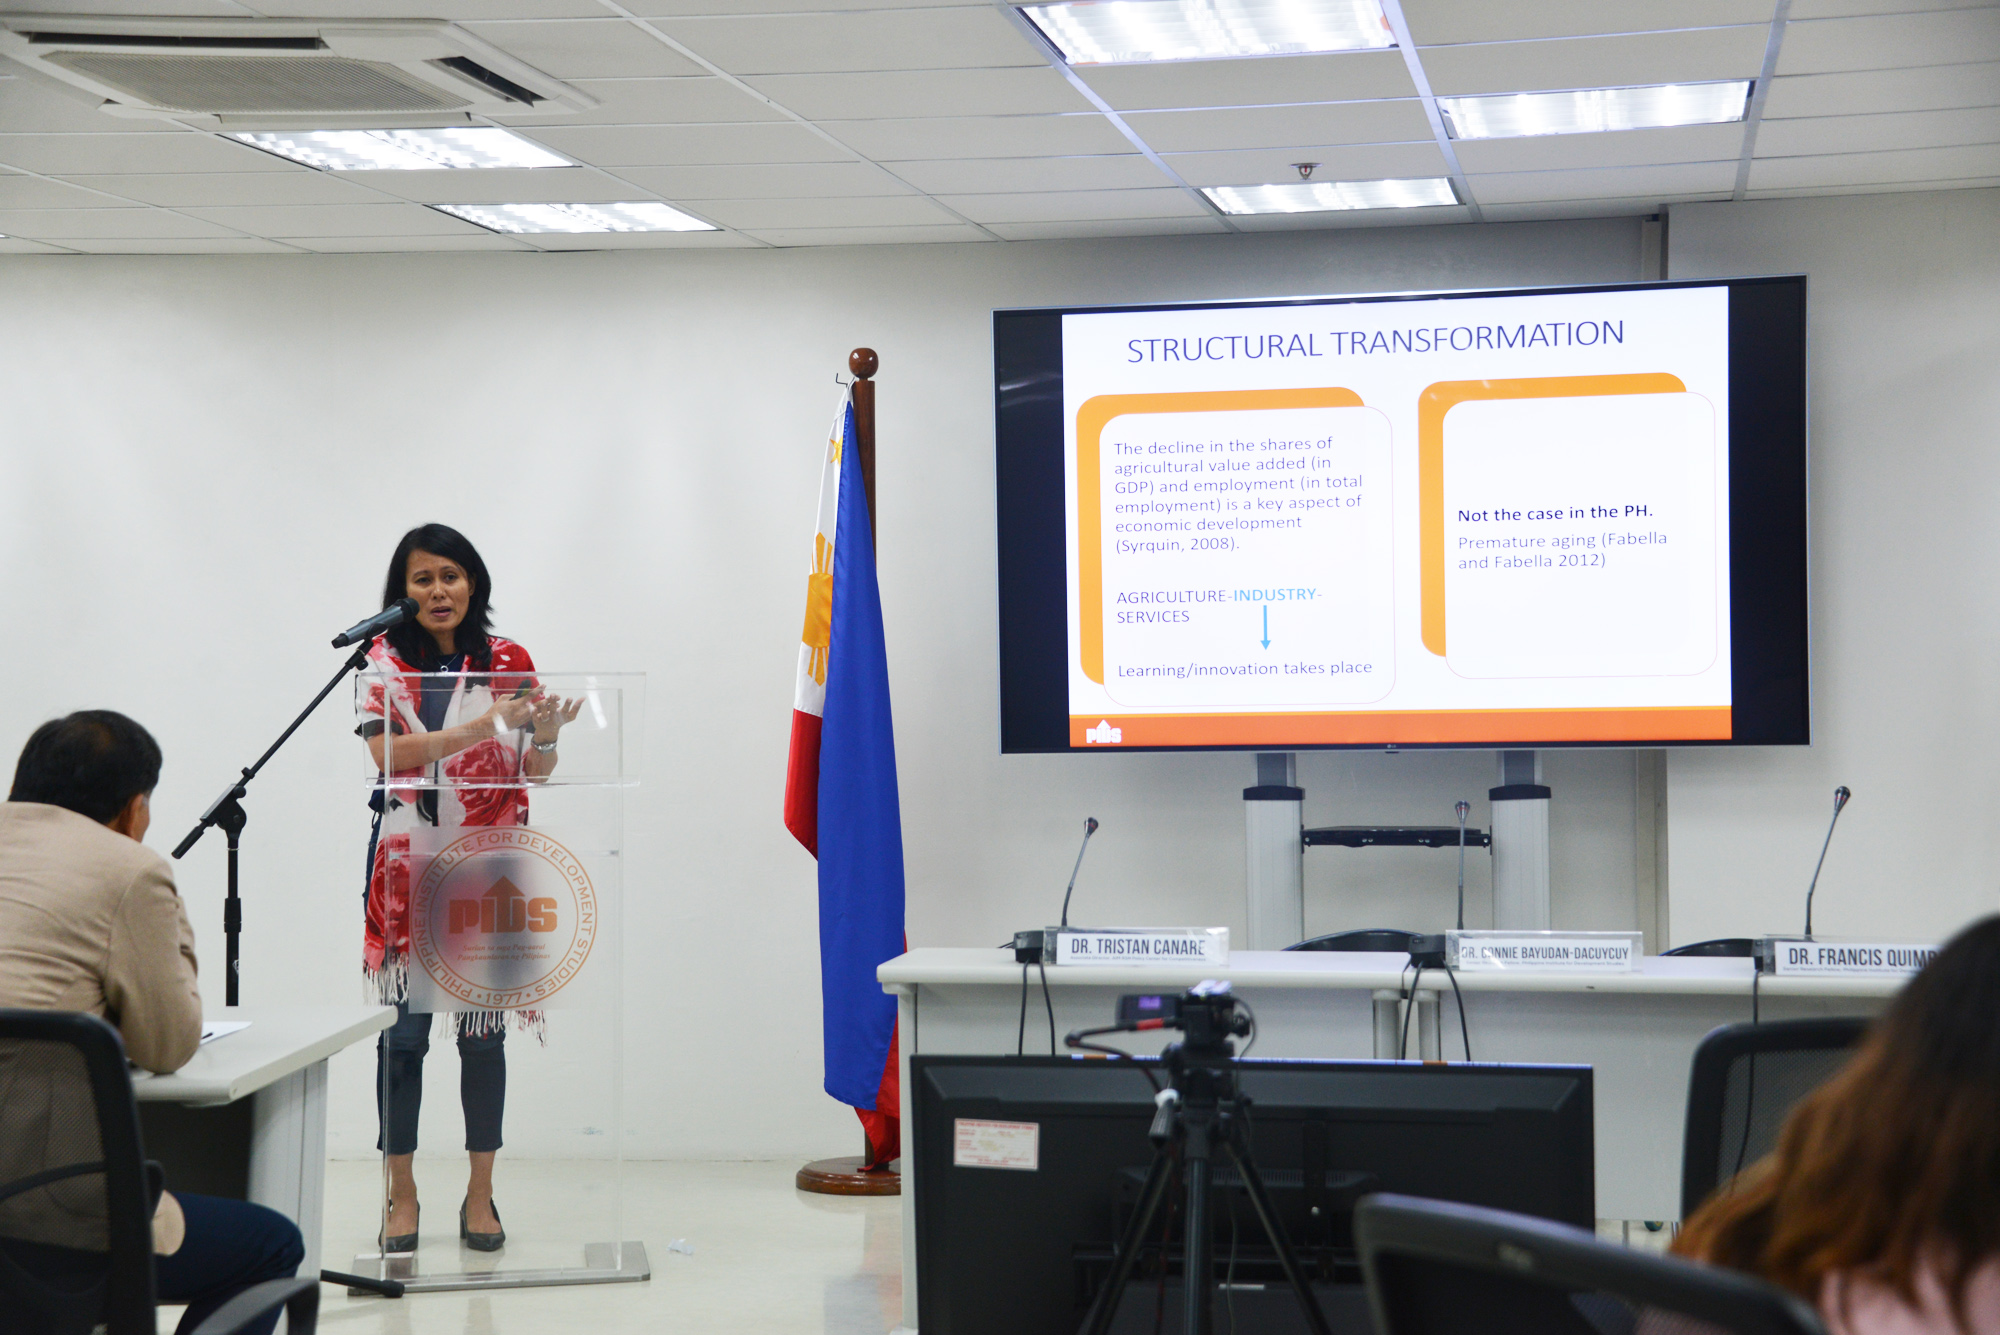 Public Seminar on Global Trade and SMEs-pids-tradesmes-18-20191016.jpg